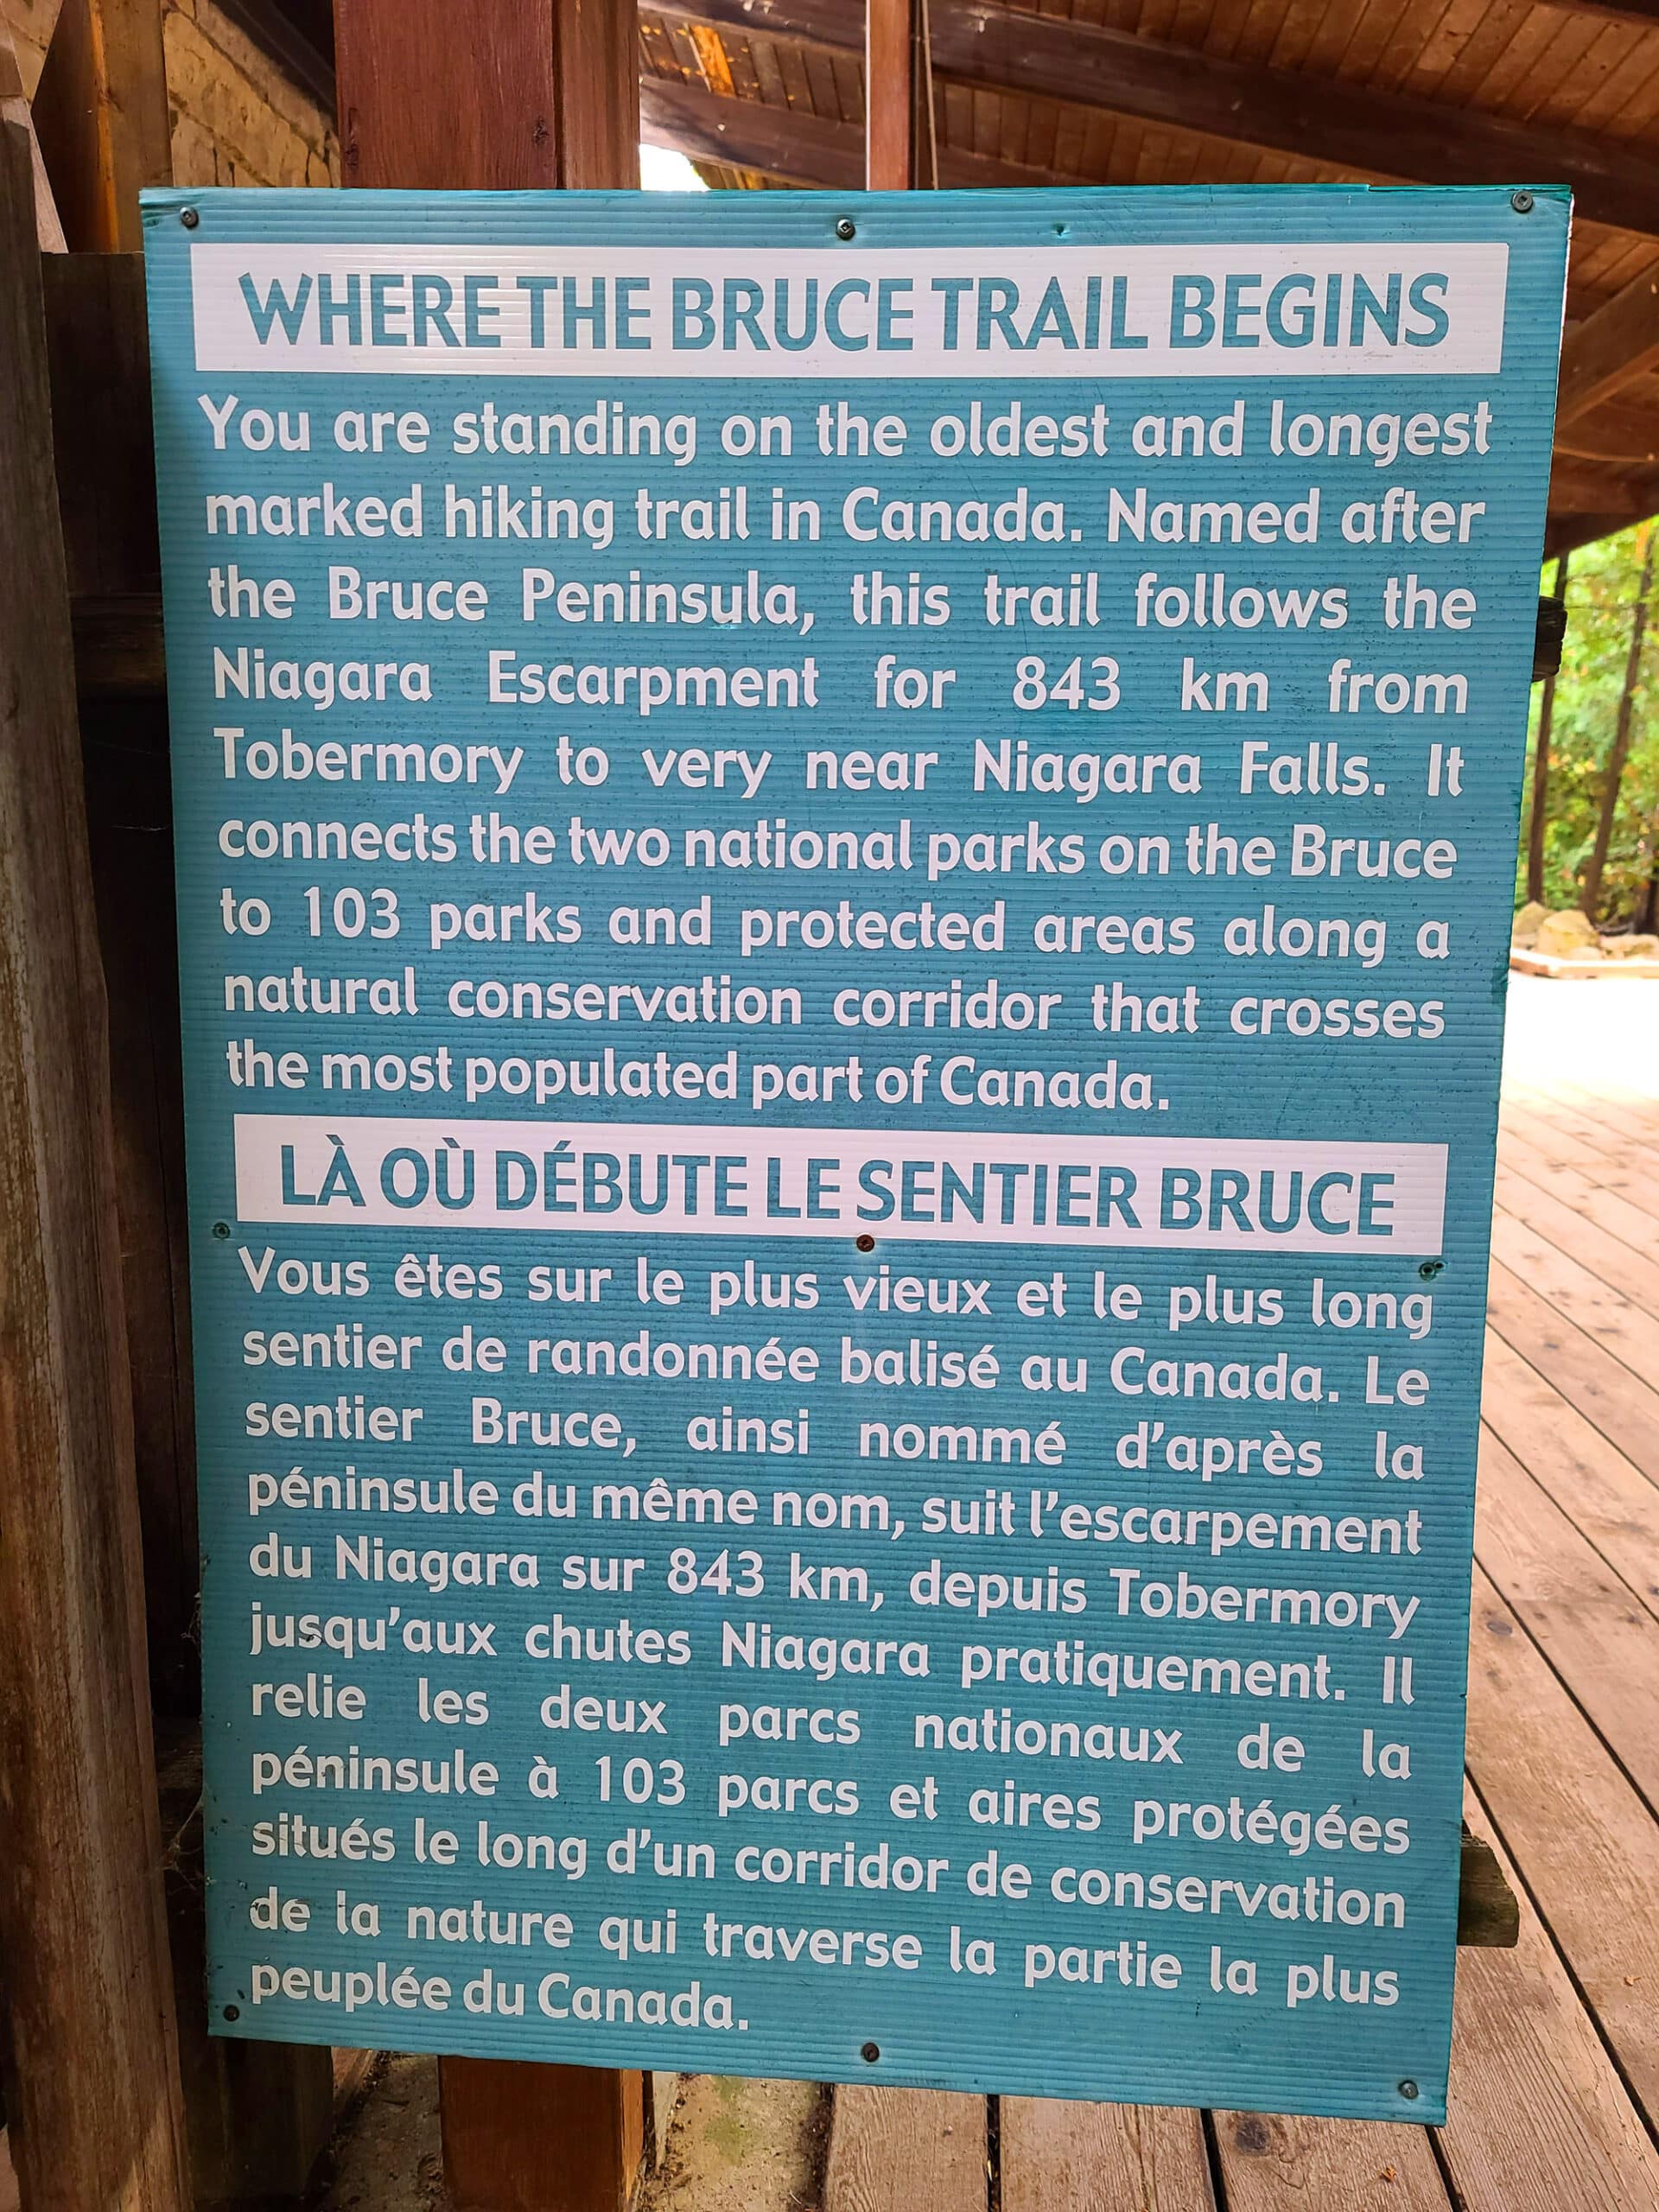 A turquoise trail sign, talking about the bruce trail.